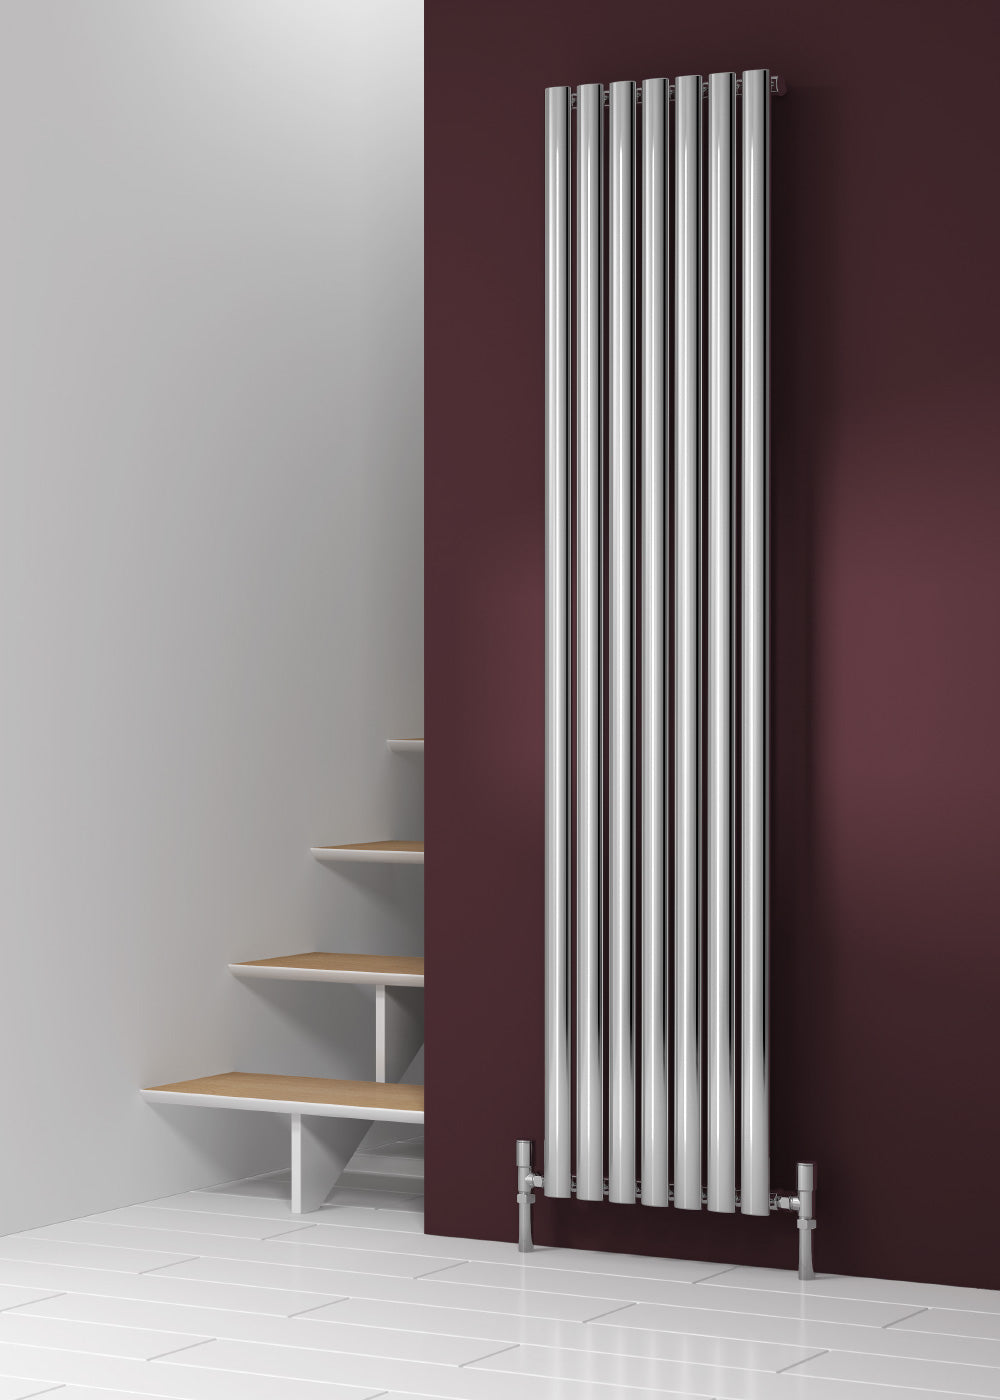 Nerox Vertical Single Radiator - 1800mm Tall - Polished Stainless Steel - Various Sizes